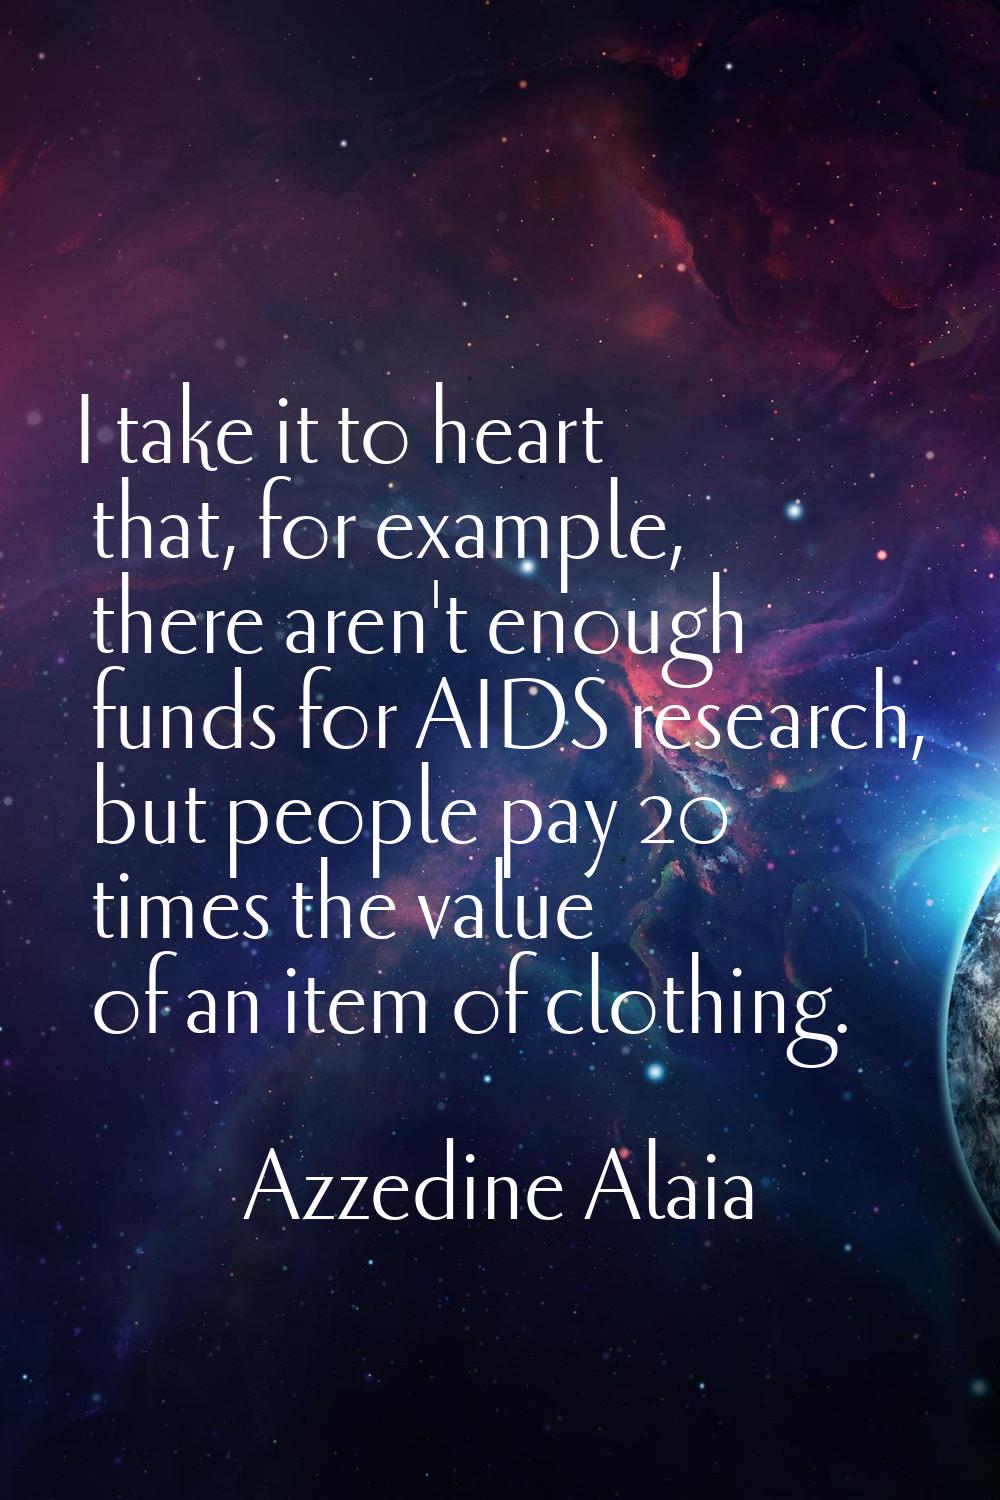 I take it to heart that, for example, there aren't enough funds for AIDS research, but people pay 2